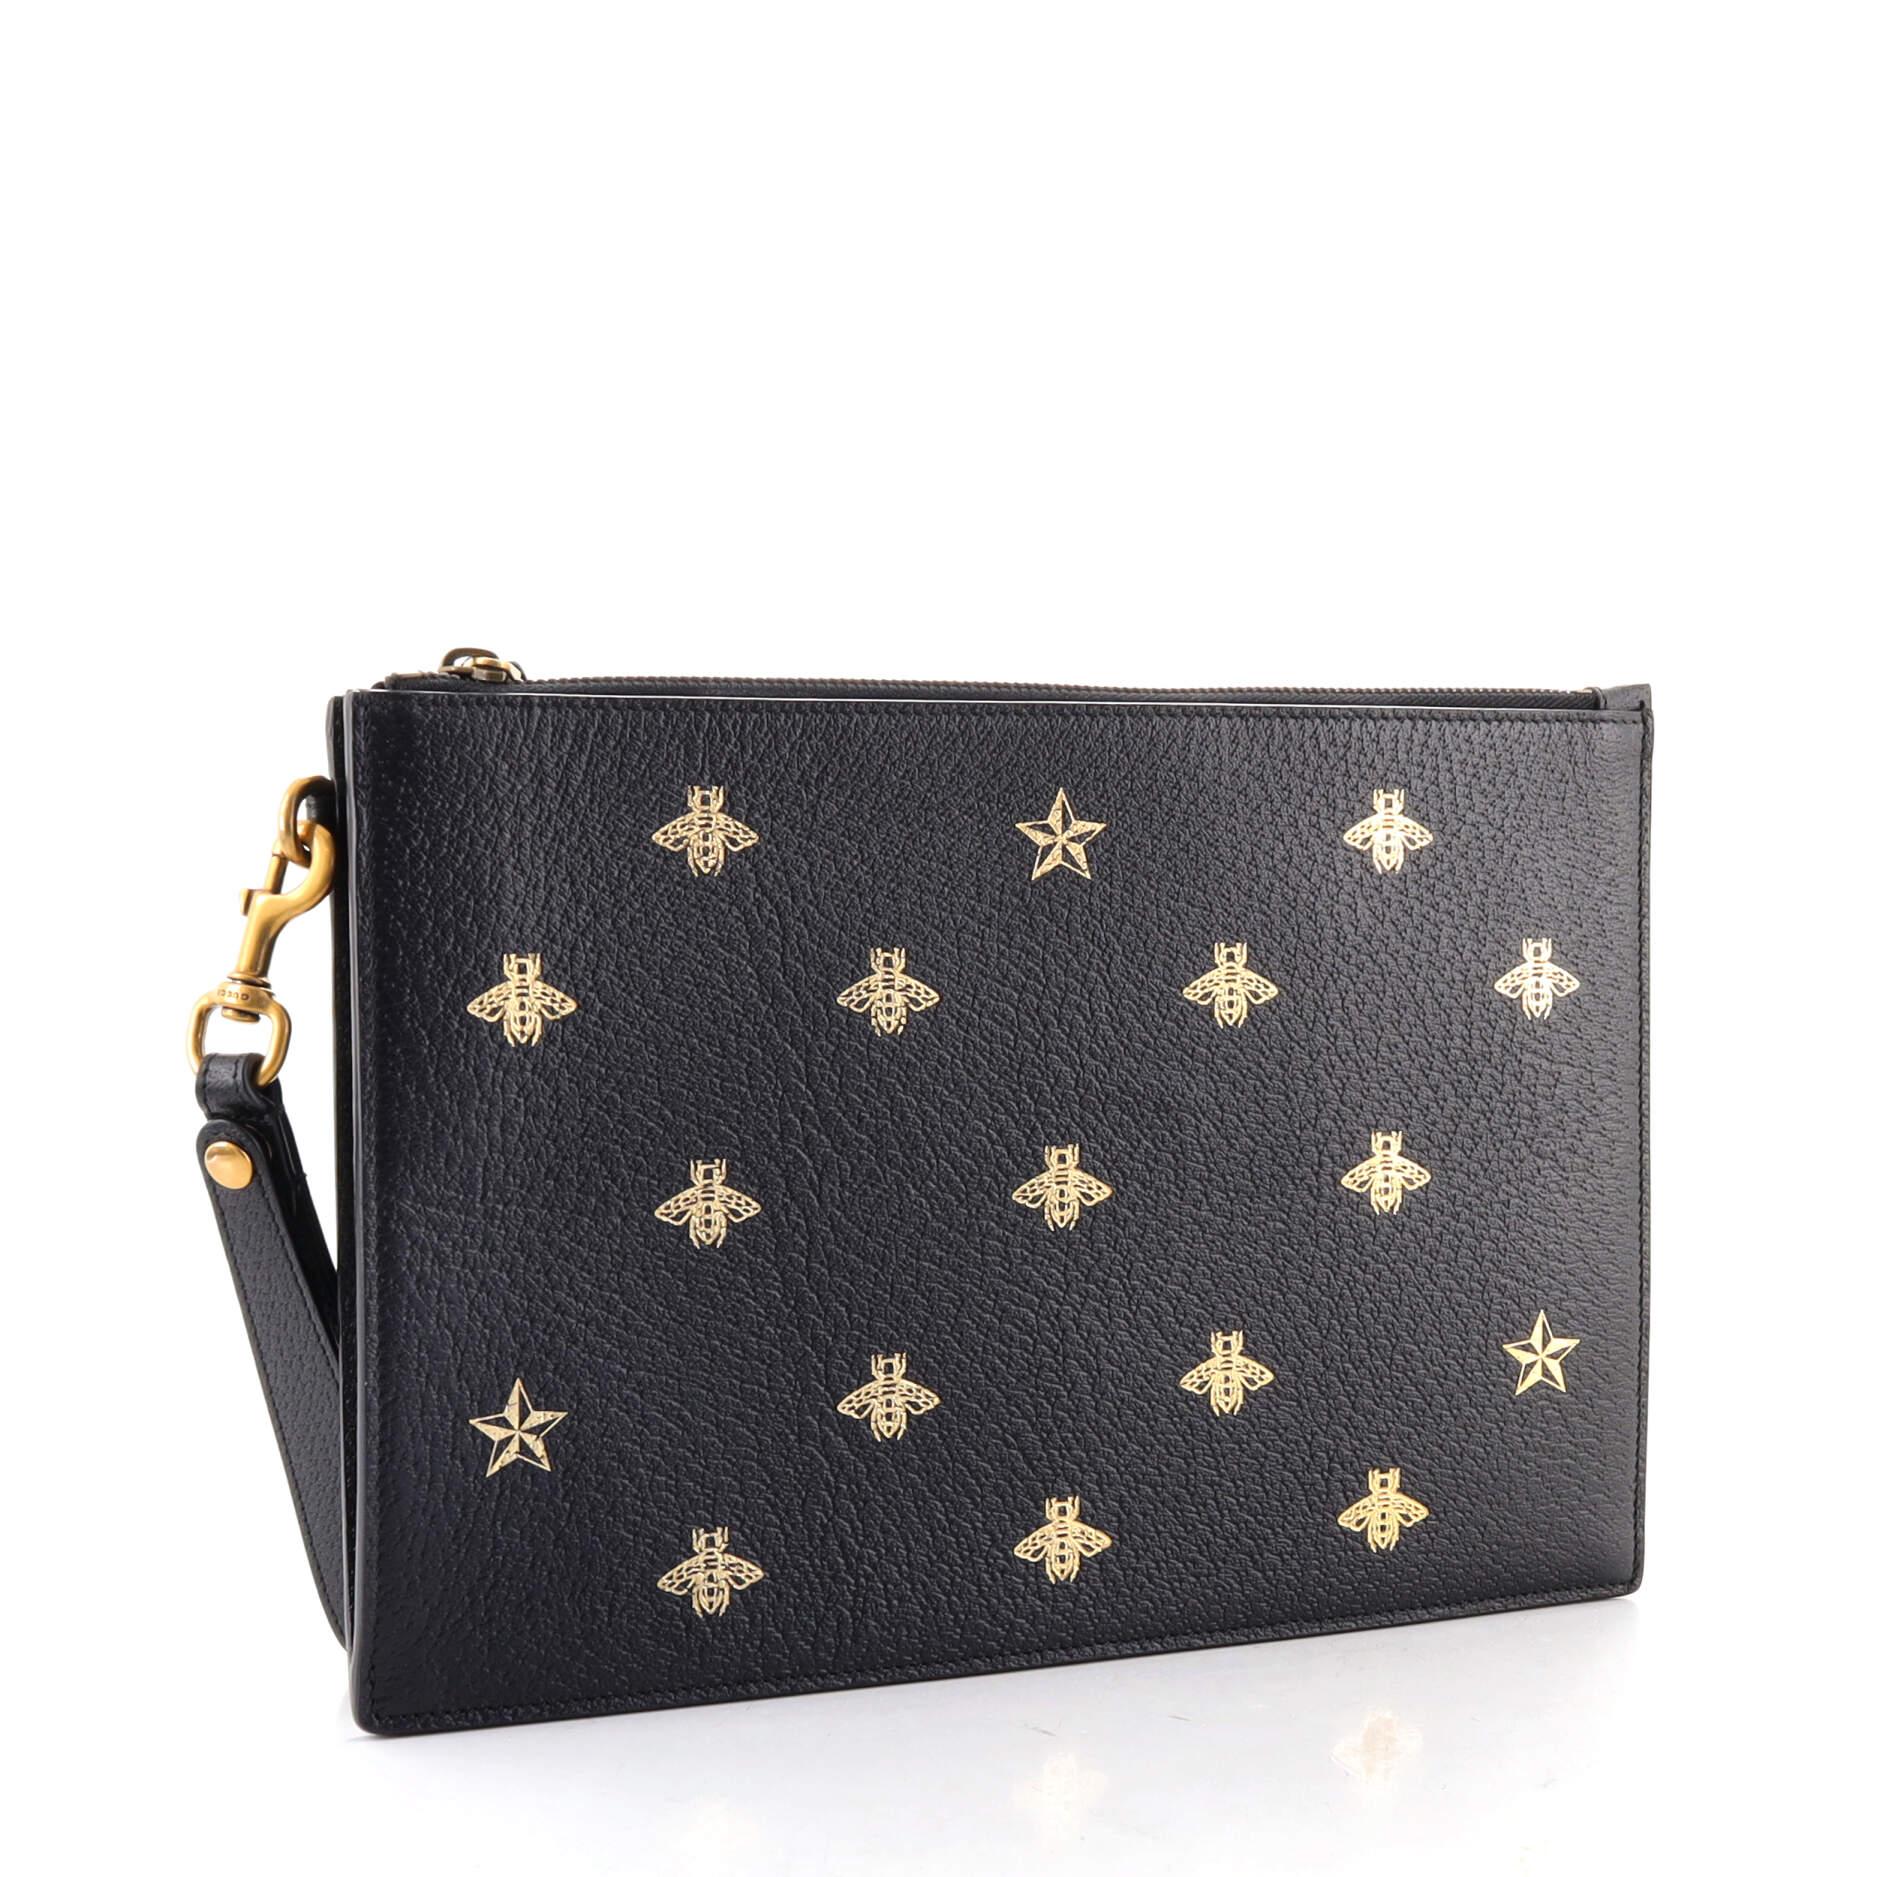 Black Gucci Bee Star Pouch Printed Leather Medium